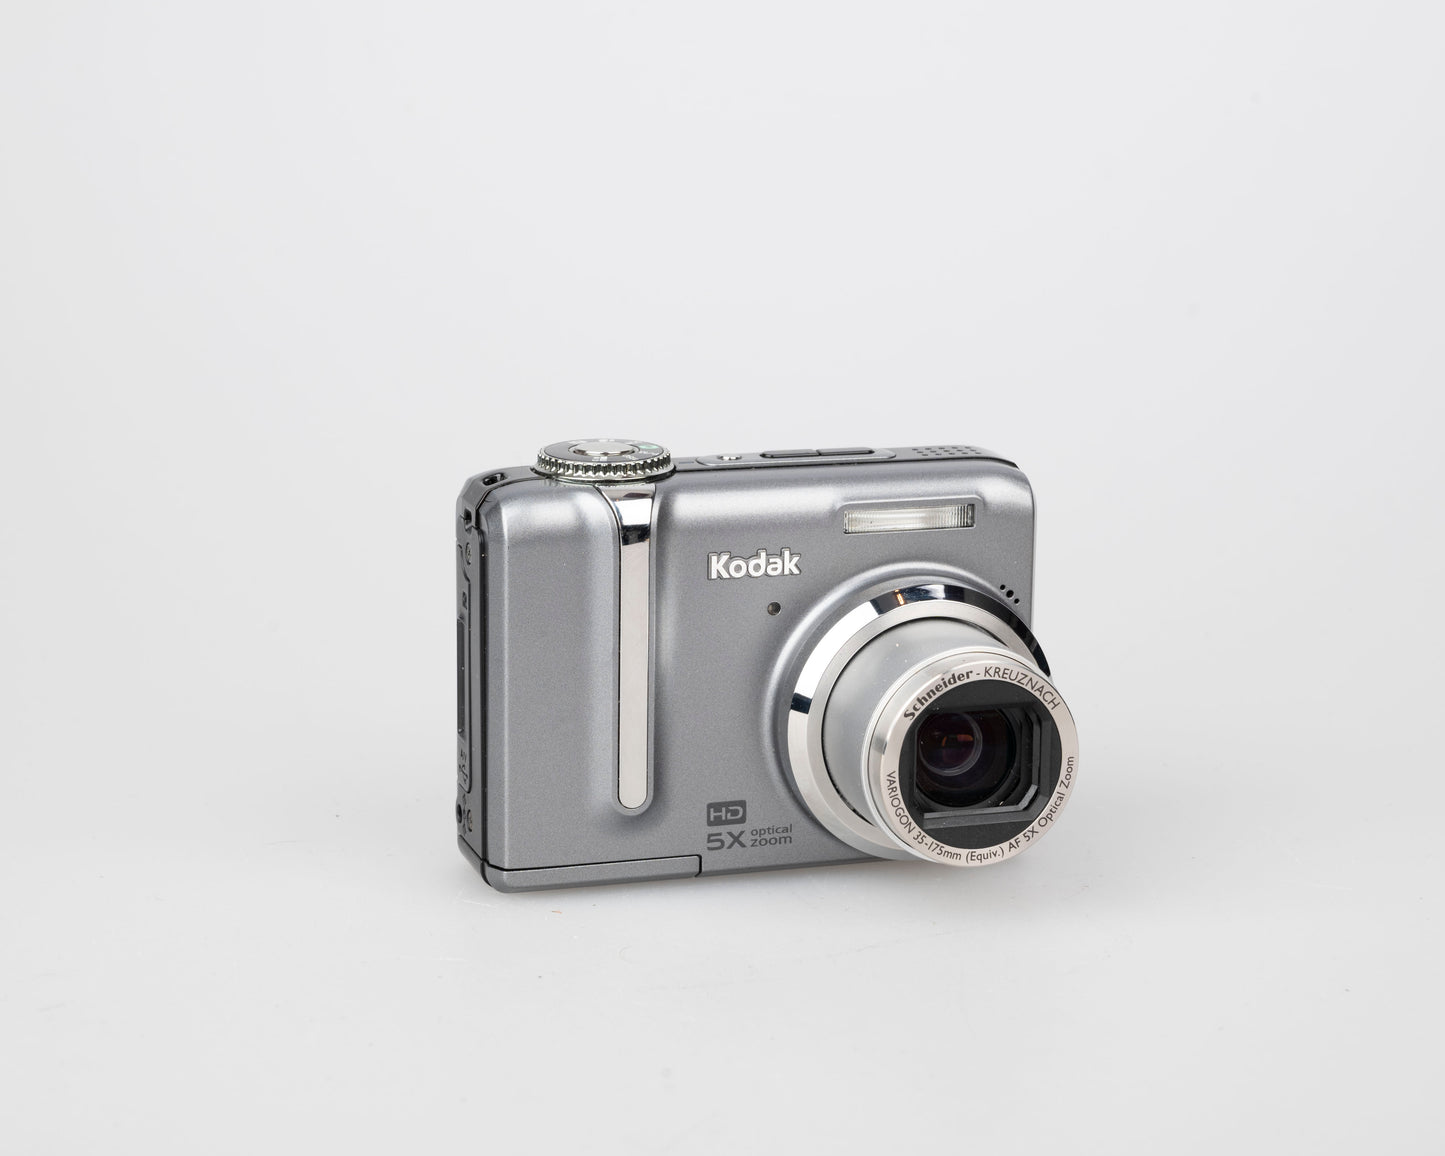 Kodak Easyshare Z1275 digicam w/ 12 MP CCD sensor *glitchy images* (uses AA batteries and SD memory cards)